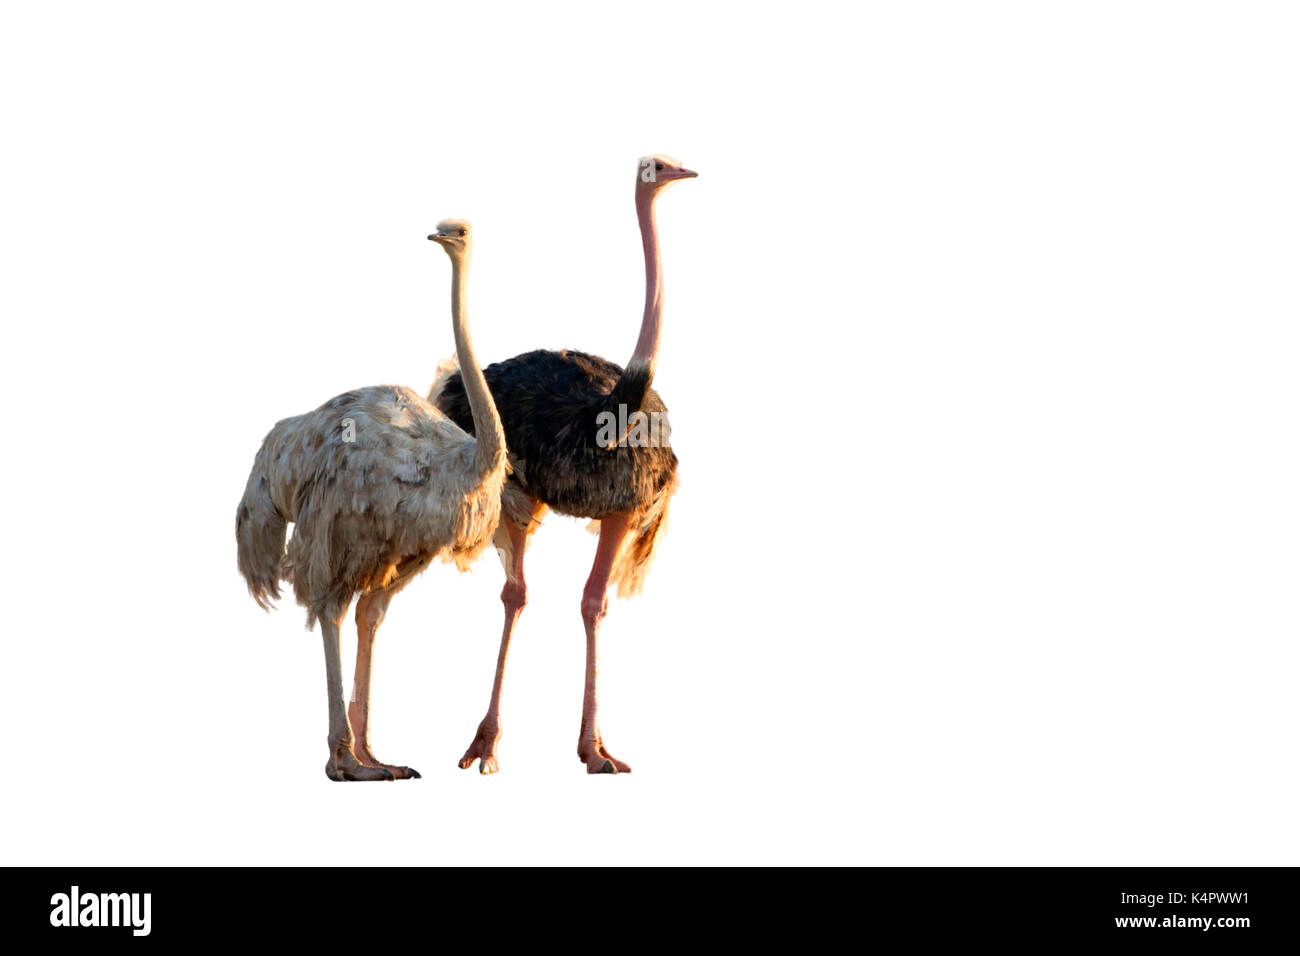 A pair of African ostriches (Struthio camelus), isolated on white background. Stock Photo